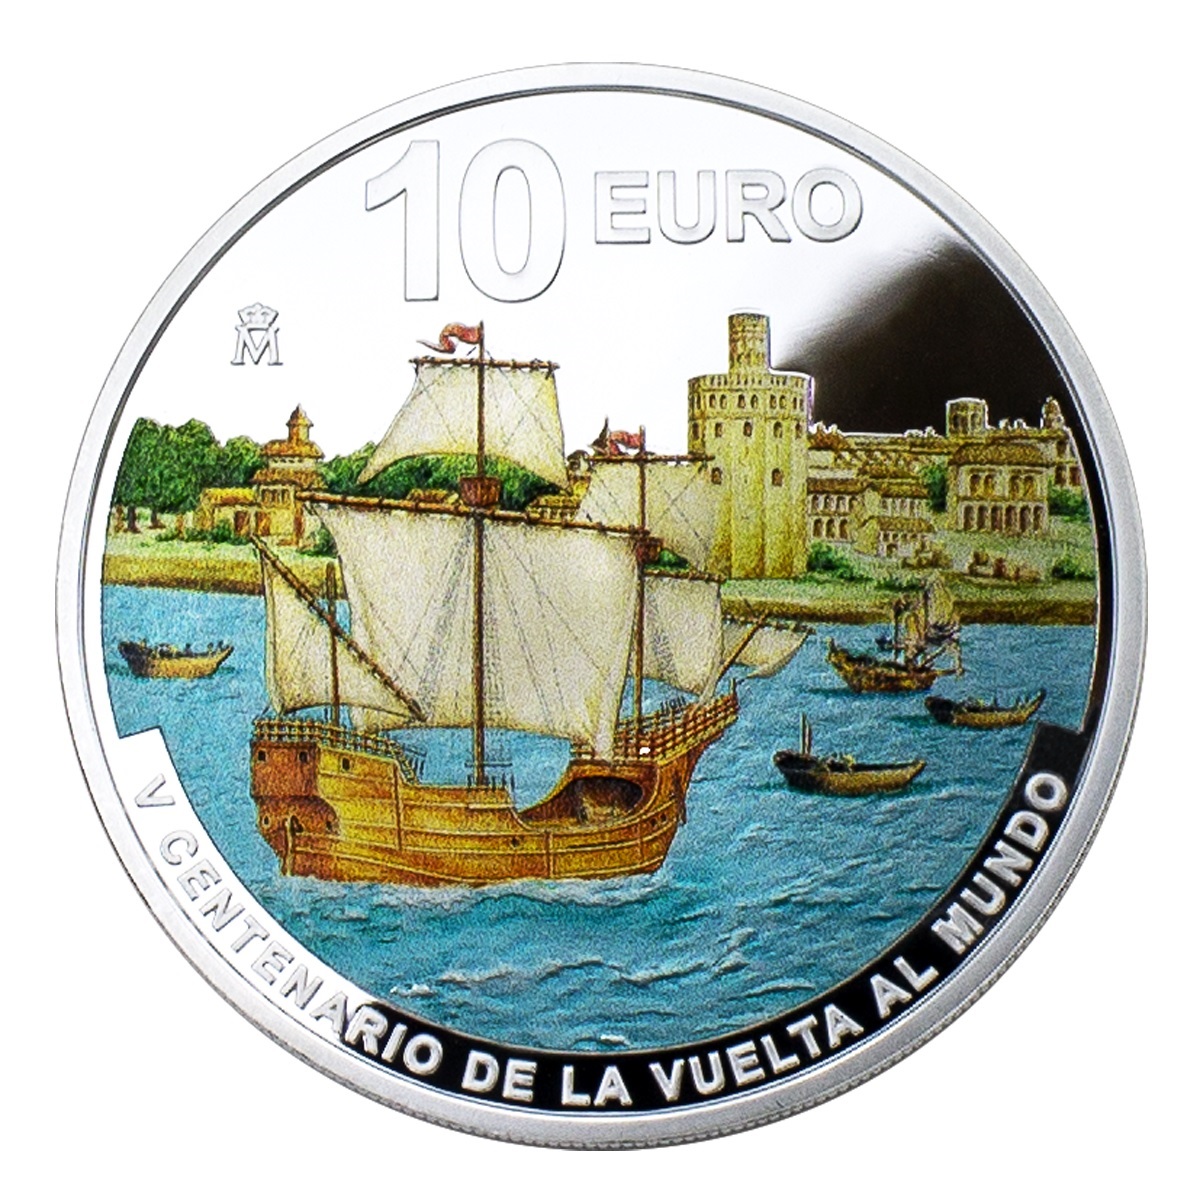 (EUR05.Proof.2022.92927010) 10 euro Spain 2022 Proof silver - Round-the-world-voyage Reverse (zoom)